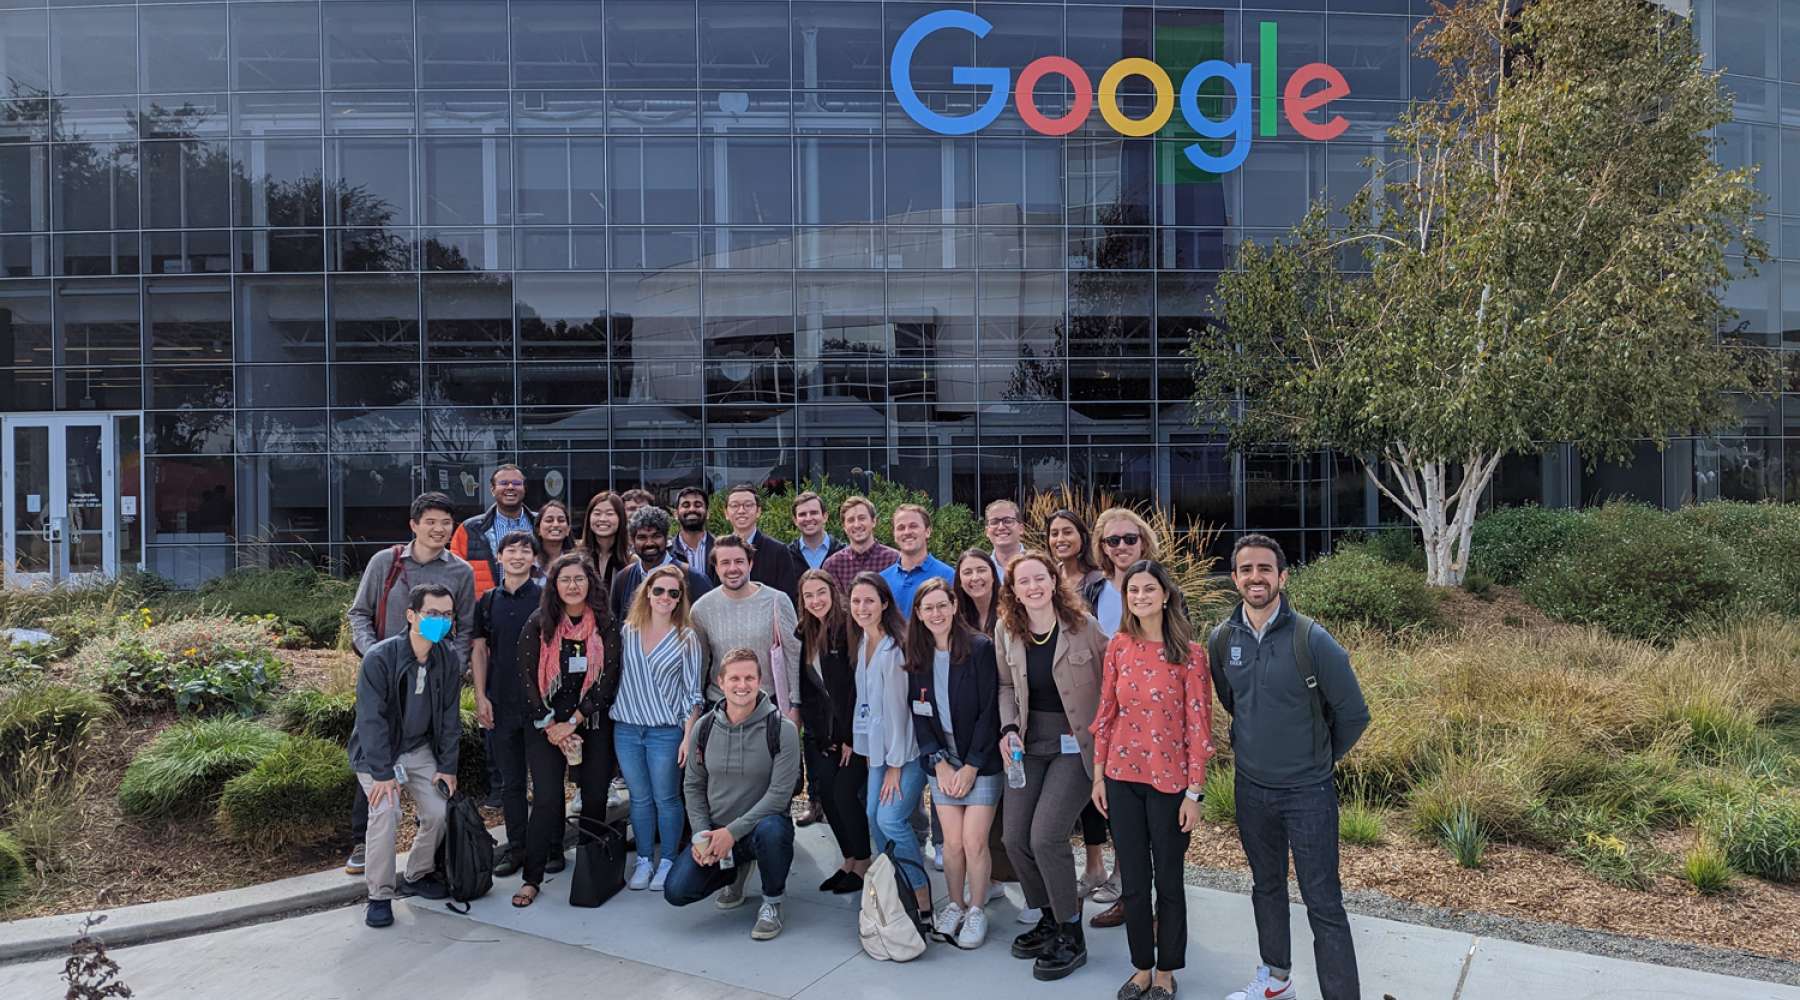 Tuck students outside of Google building